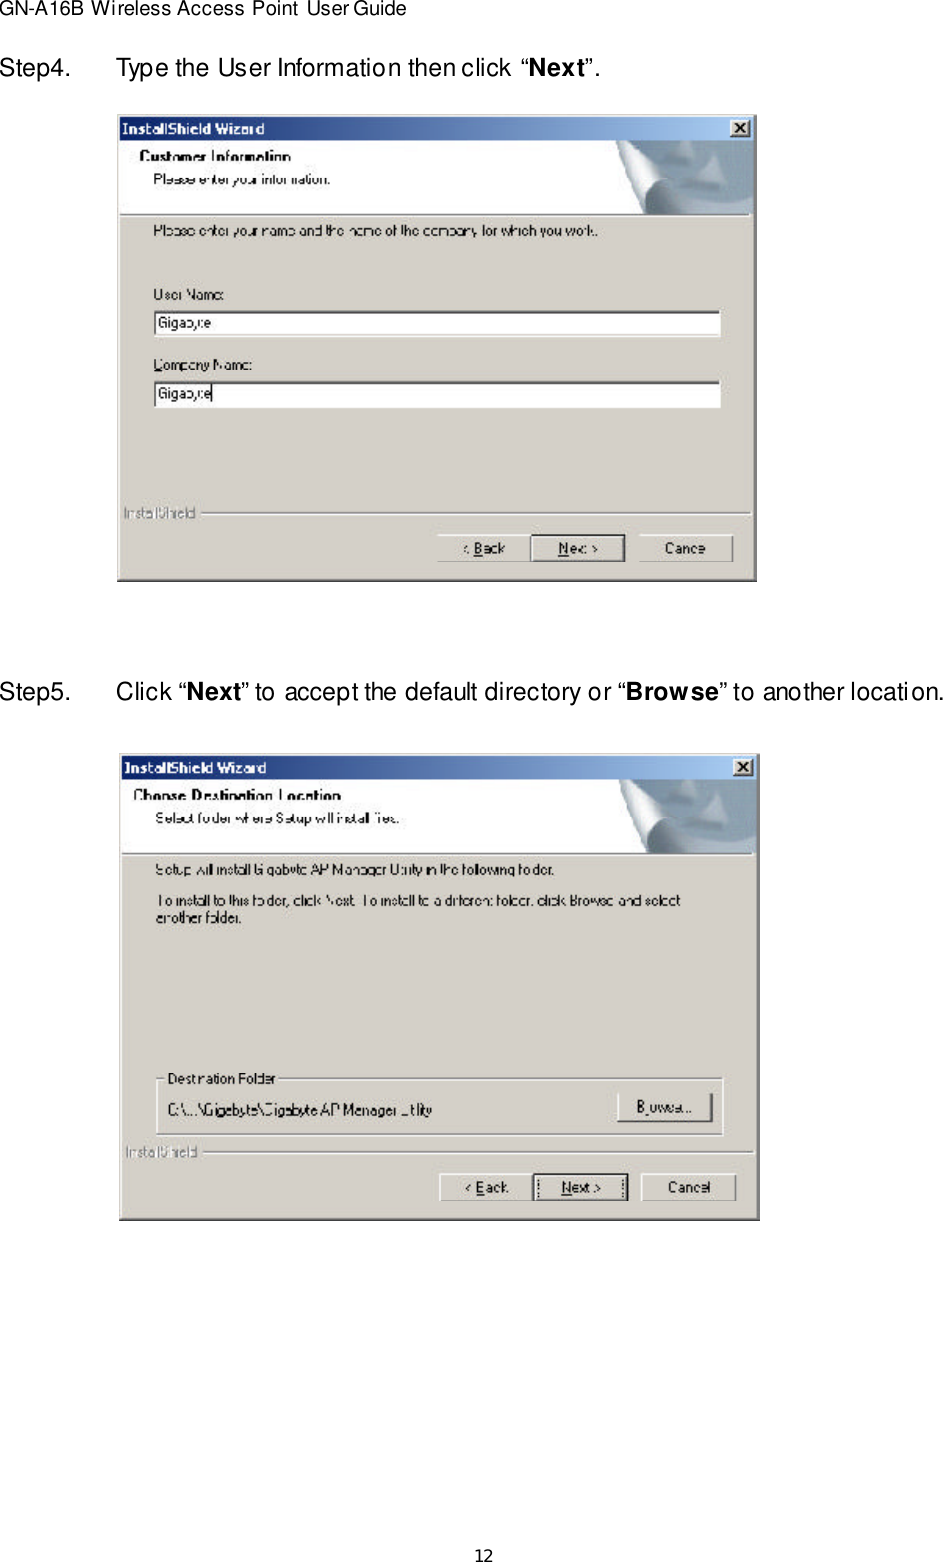 12GN-A16B Wireless Access Point User GuideStep4.Type the User Information then click “Next”.Step5.Click “Next” to accept the default directory or “Browse” to another location.